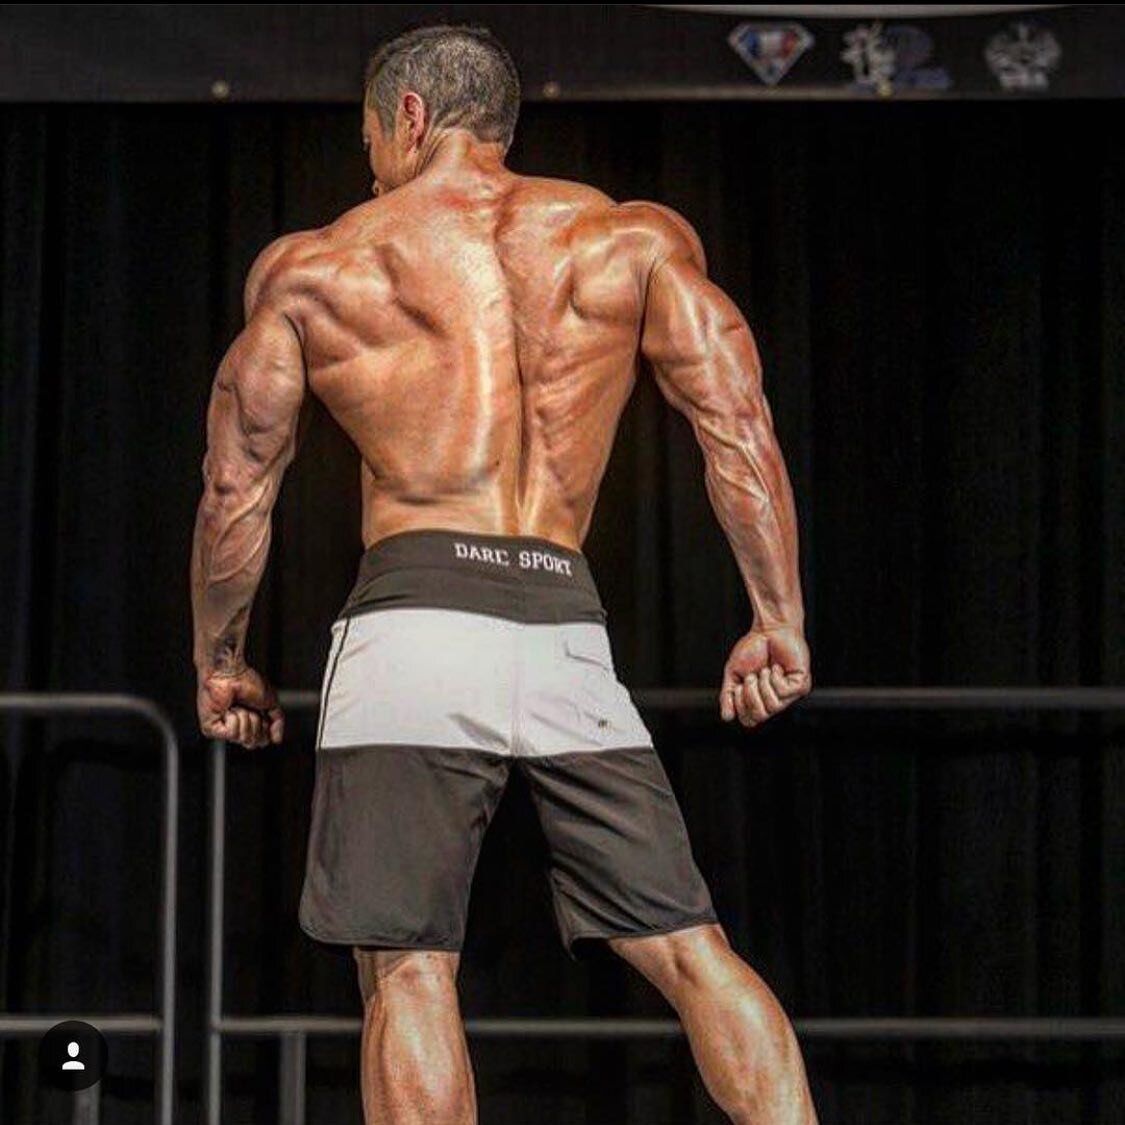 #throwbackthursday to a mid-transistion back pose I did in 2017.  See what I did there, a #throwback to an old back pose😉 #tbt

_________________________________

LOOKING FOR ONLINE COACHING?
(Find a direct link in my bio.)
I'm only accepting 3 more